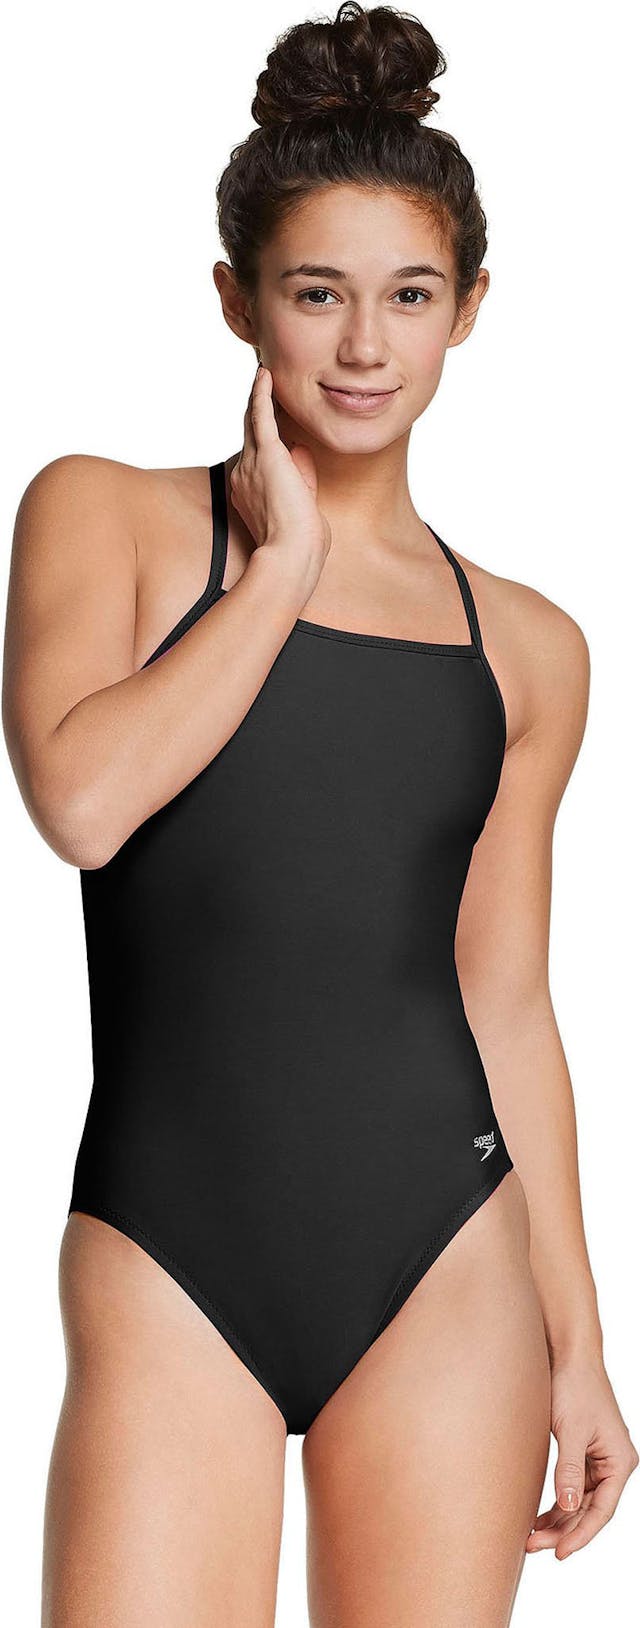 Product image for The One Training Swimsuit - Women's